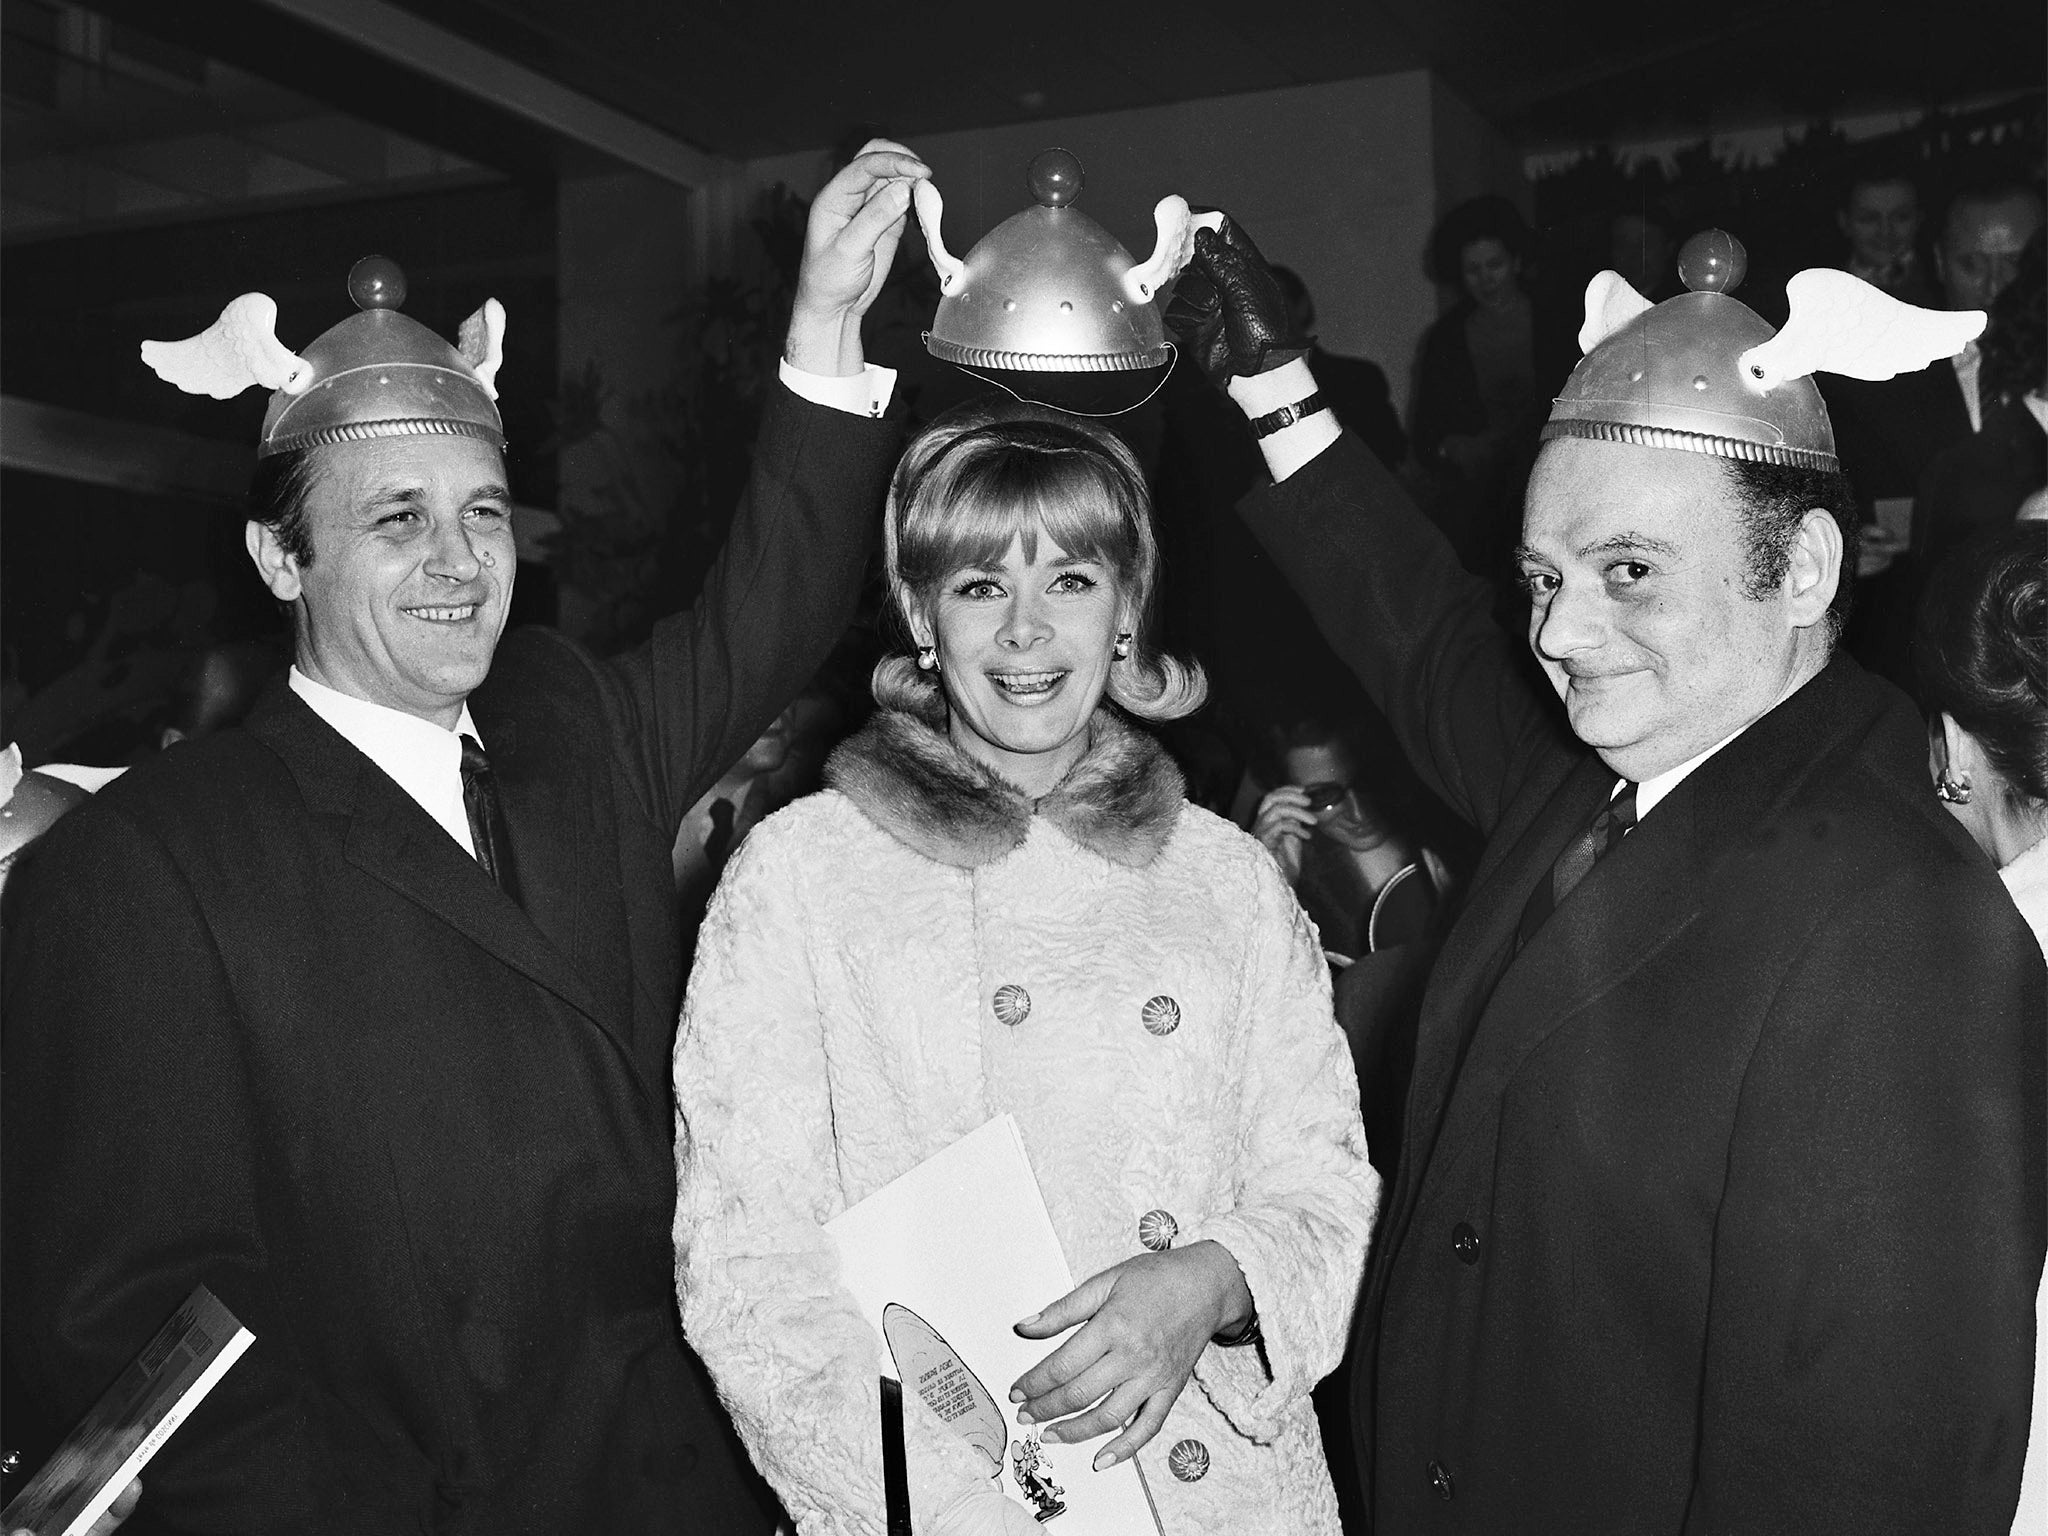 Uderzo and Goscinny with TV presenter Jacqueline Huet at the premiere of ‘Asterix The Gaul’ at the Balzac cinema, Paris, in 1967